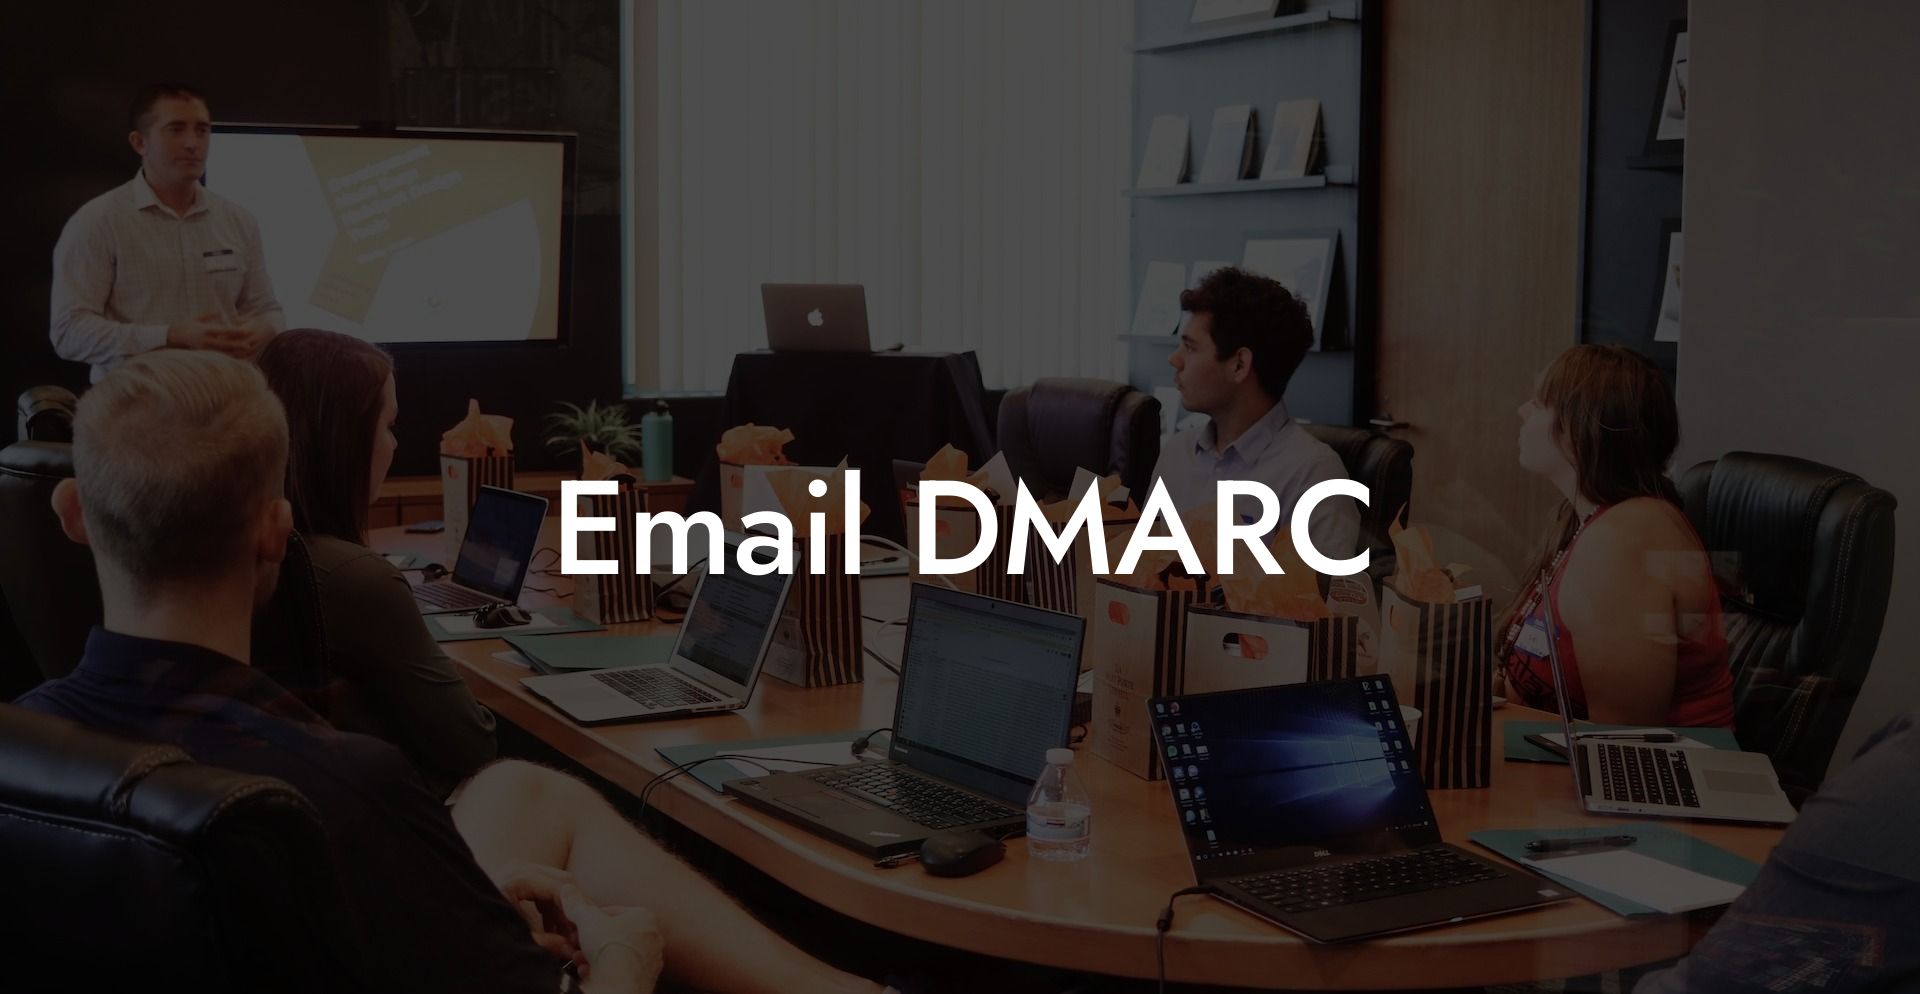 Email DMARC